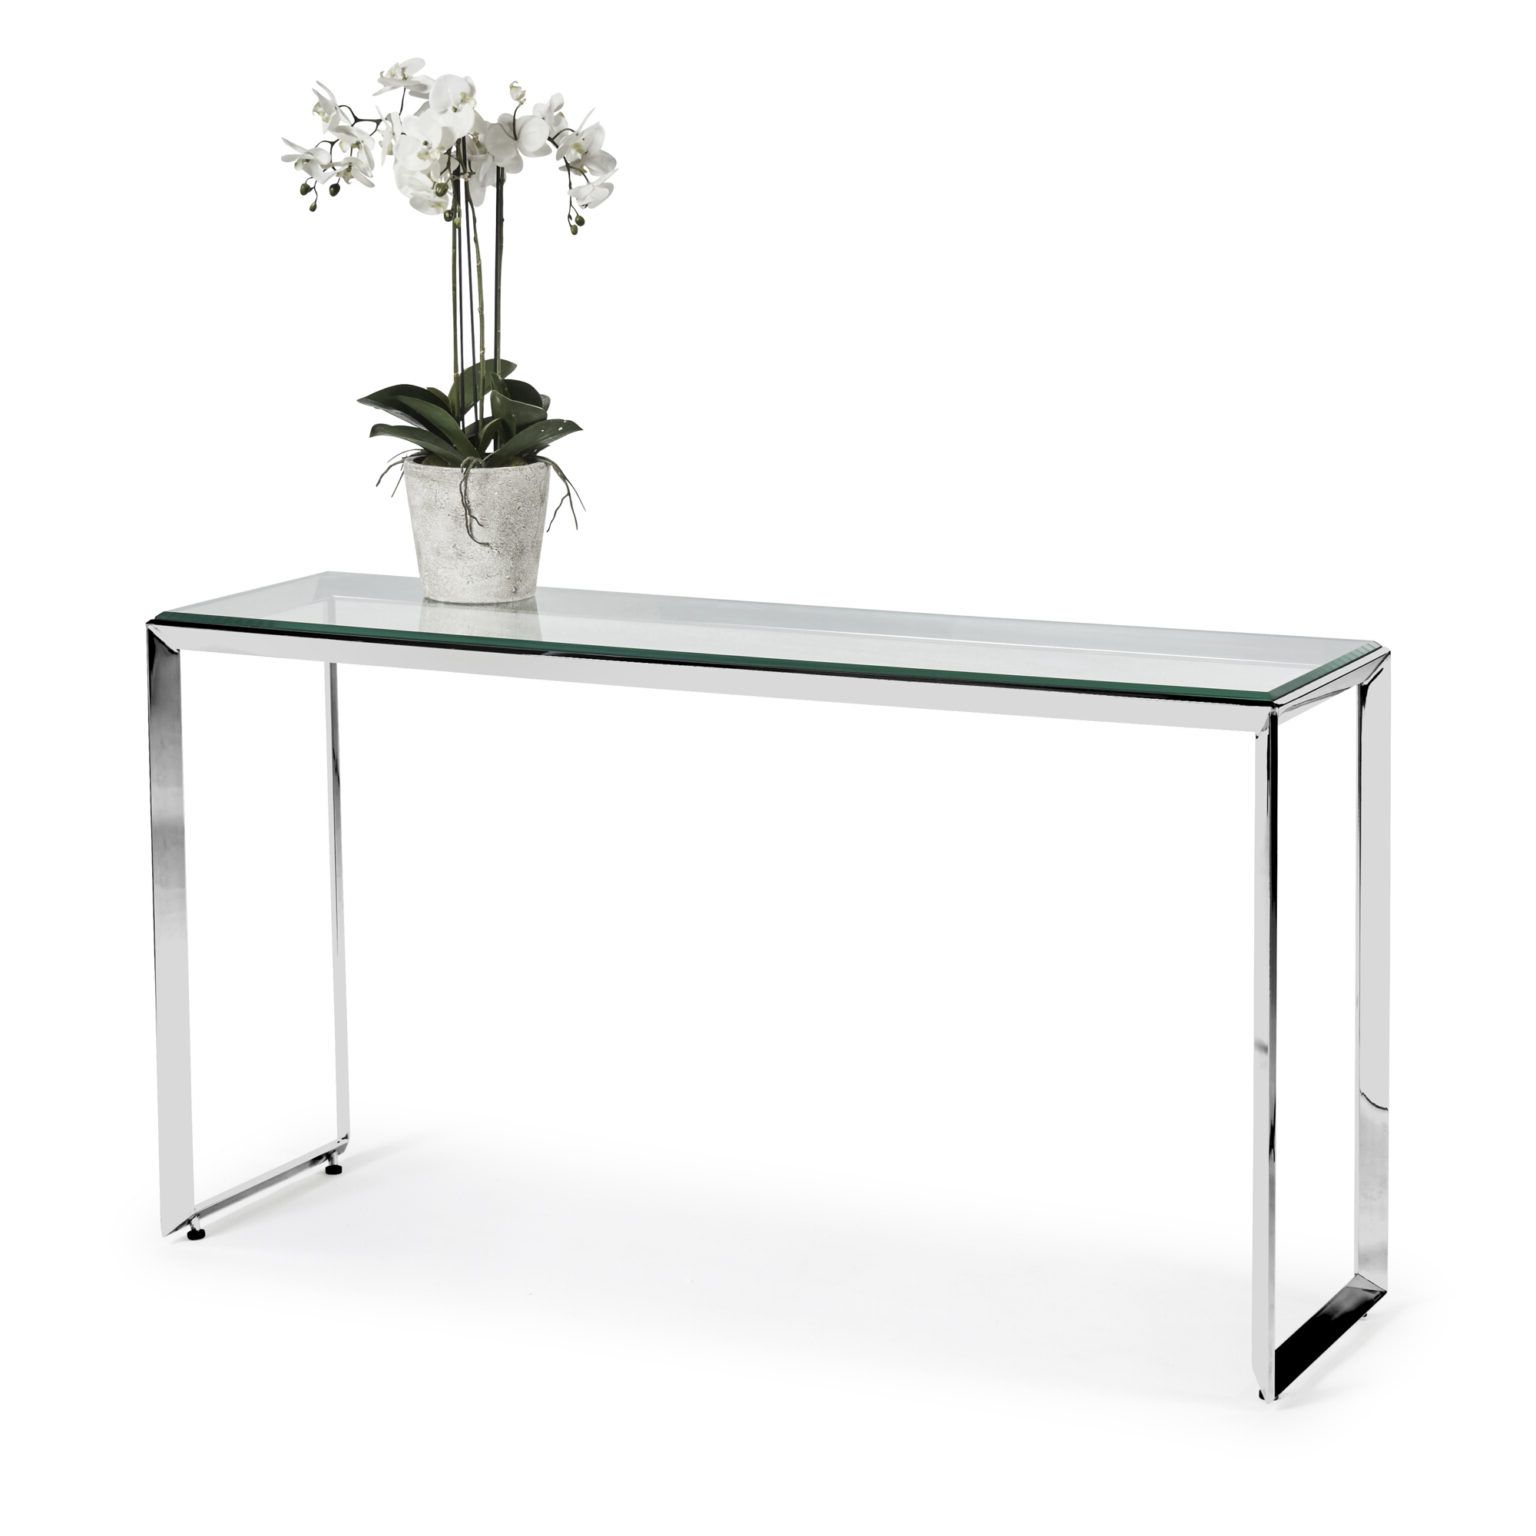 Well Liked Glass And Stainless Steel Console Tables In Small Glass Console Table With Polished Stainless Steel (View 3 of 10)